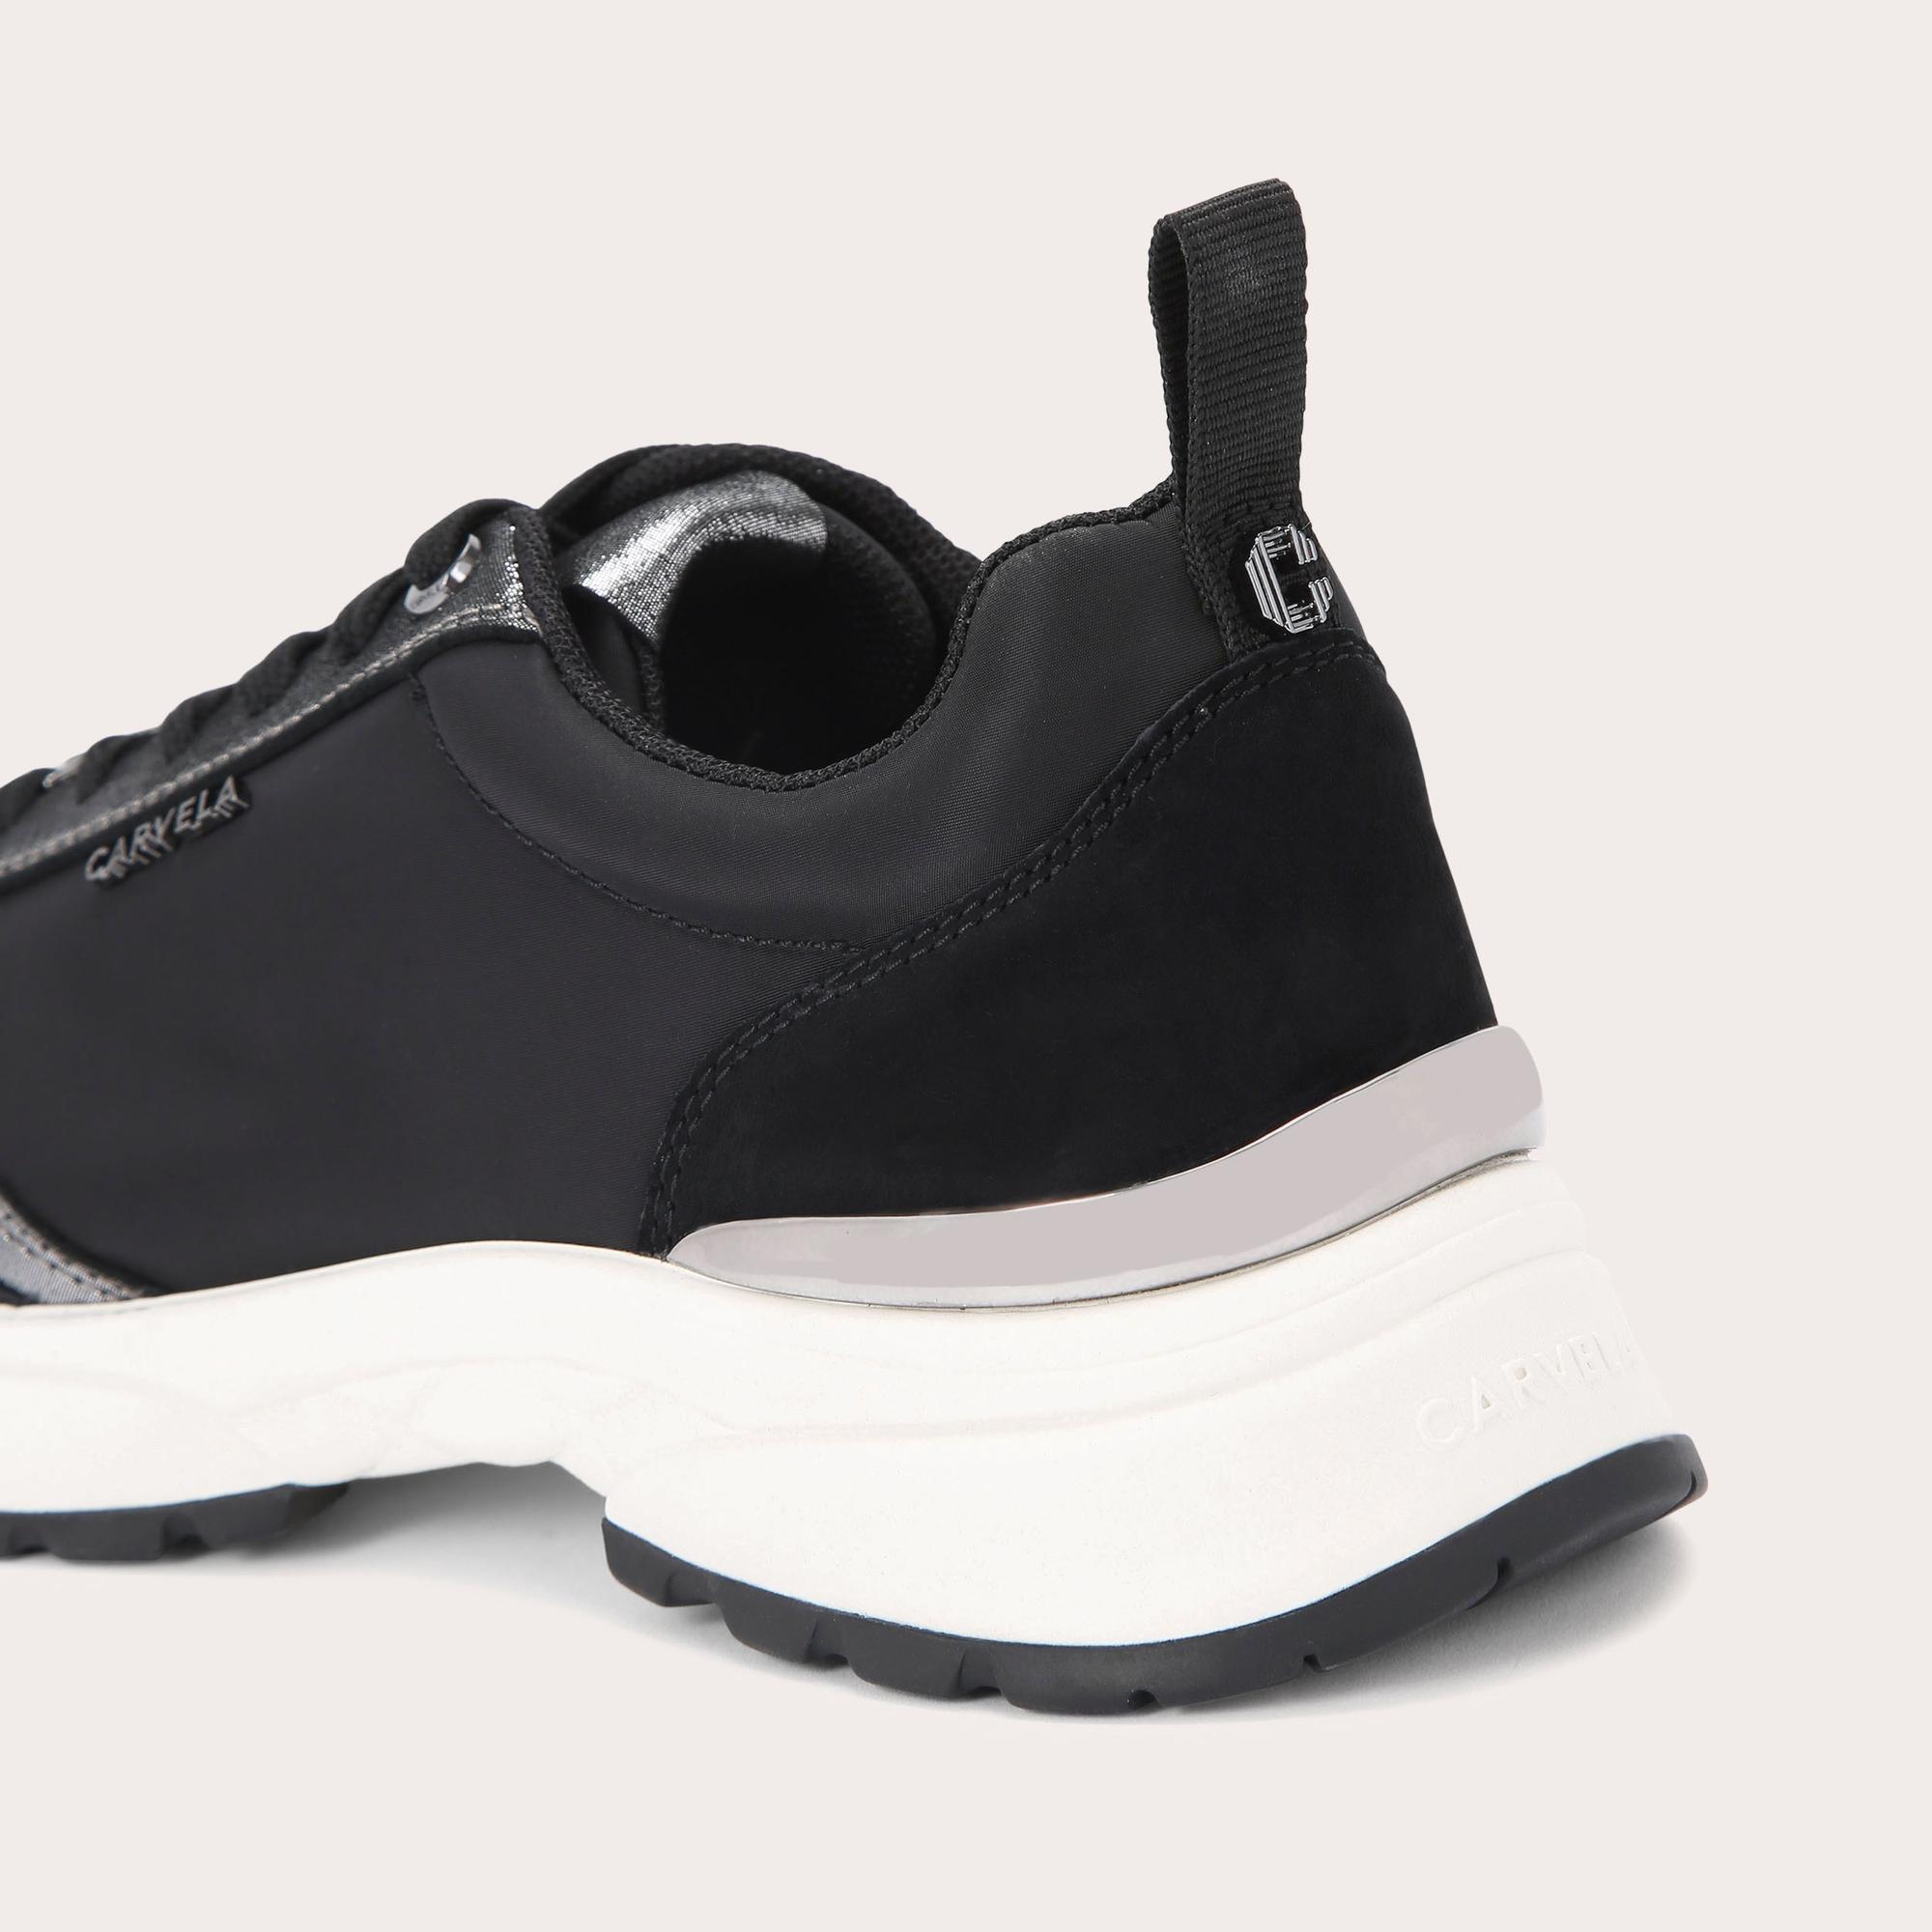 Women's Trainers High Tops, Sneakers Casual Trainers | Carvela